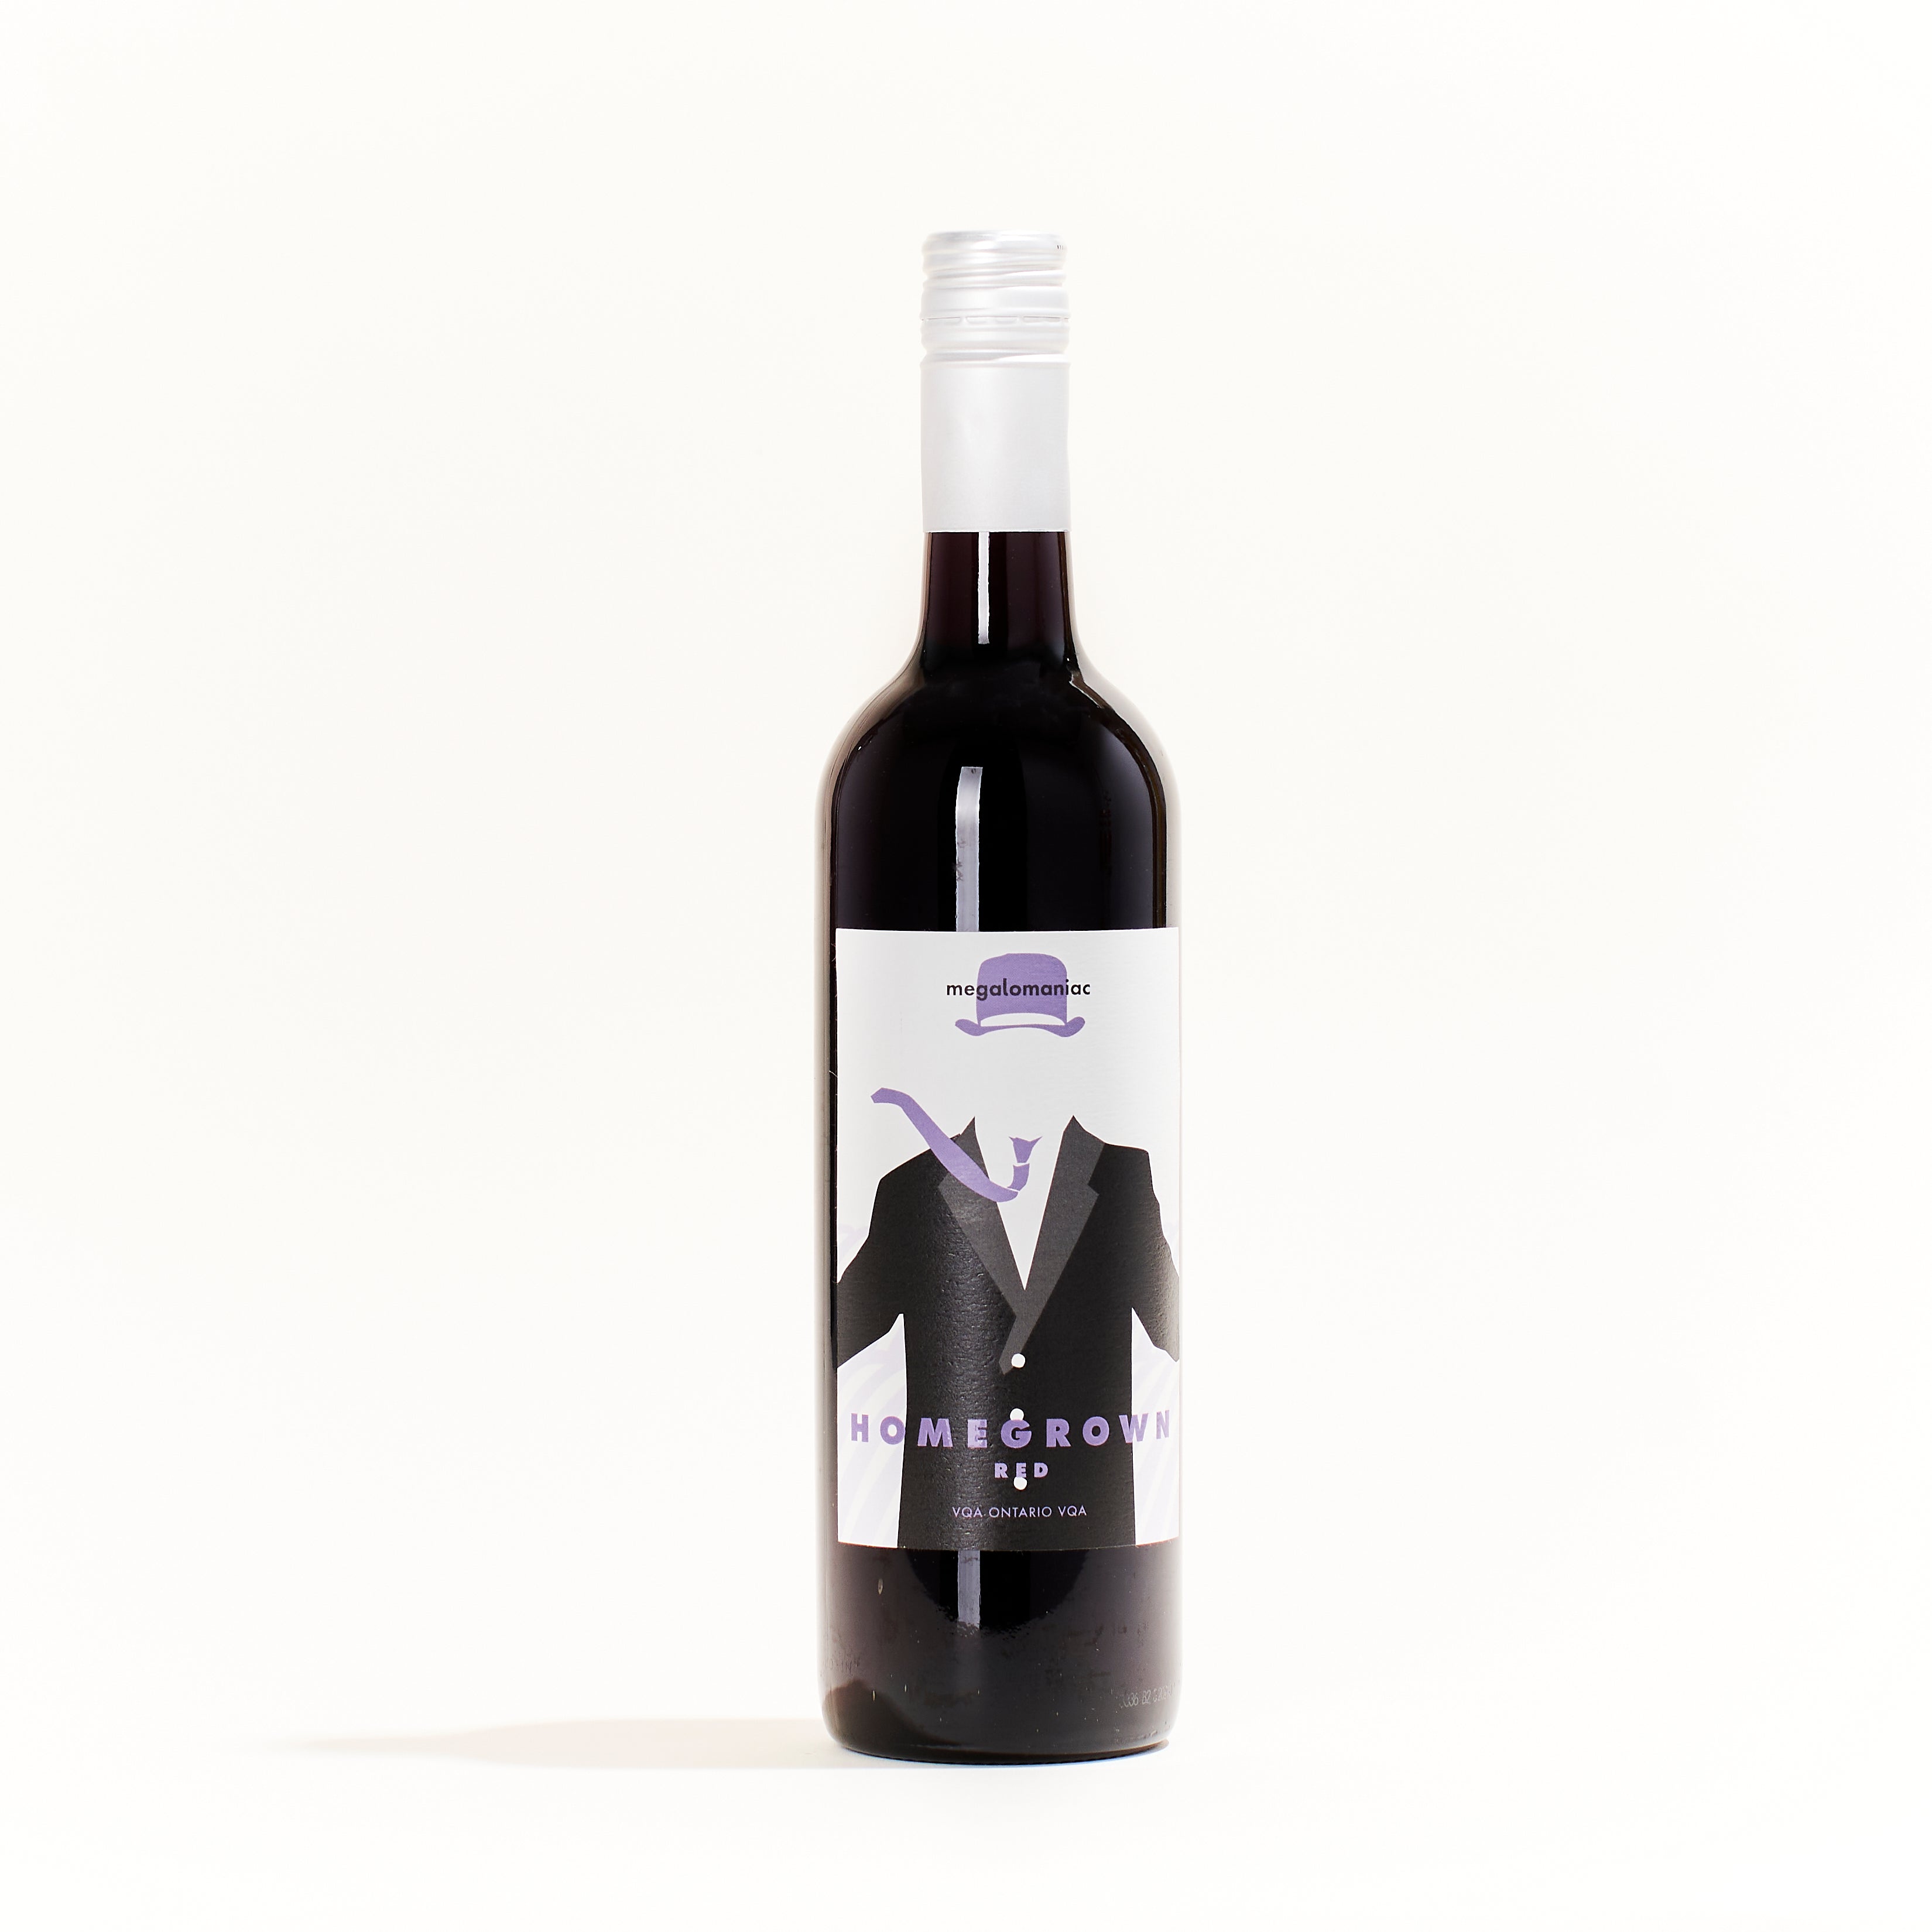 Homegrown Red Blend, by Megalomaniac, is a natural Red from Ontario, Canada. Made from Cabernet Sauvignon, Merlot, Cabernet Franc, Malbec, Petit Verdot grapes